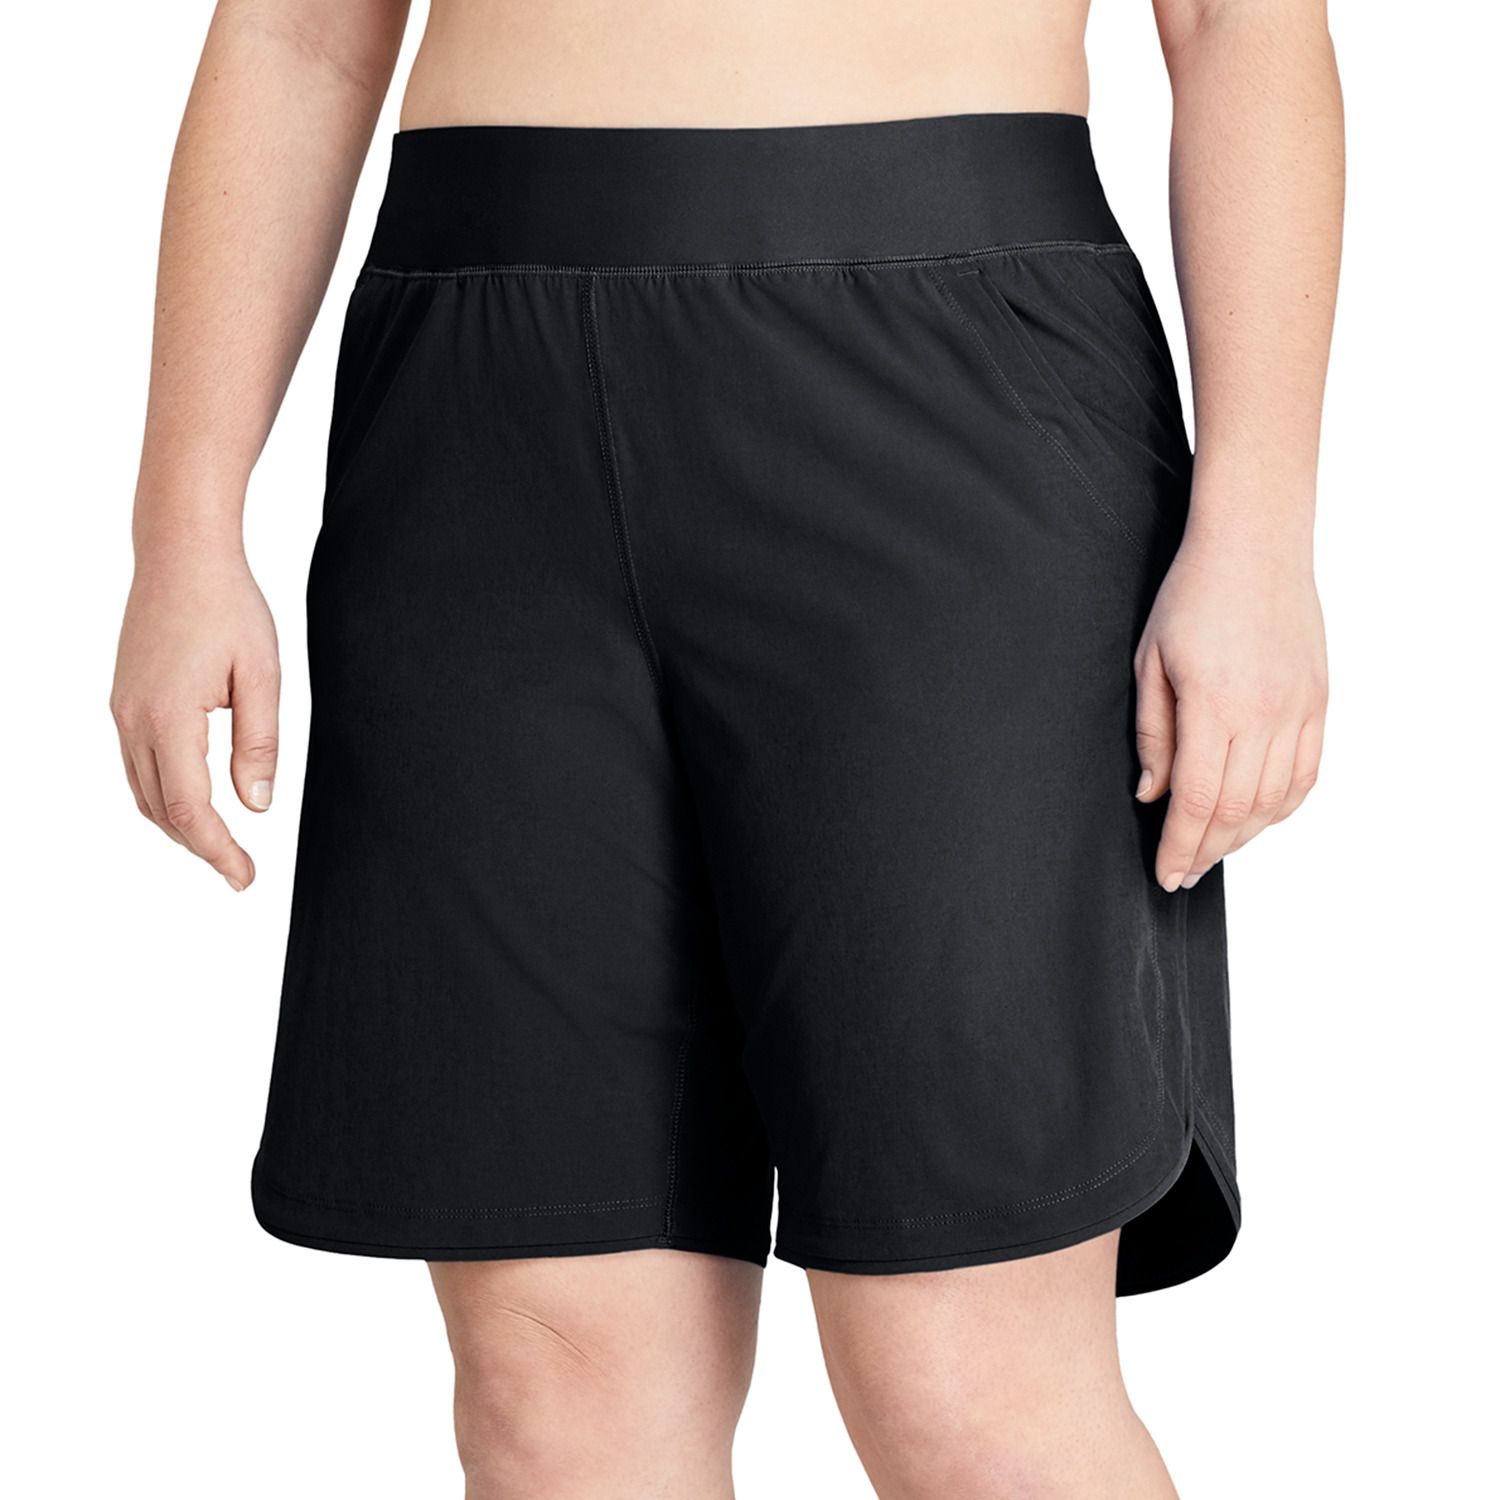 Image for Lands' End Petite Quick Dry Thigh-Minimizer Swim Board Shorts at Kohl's.